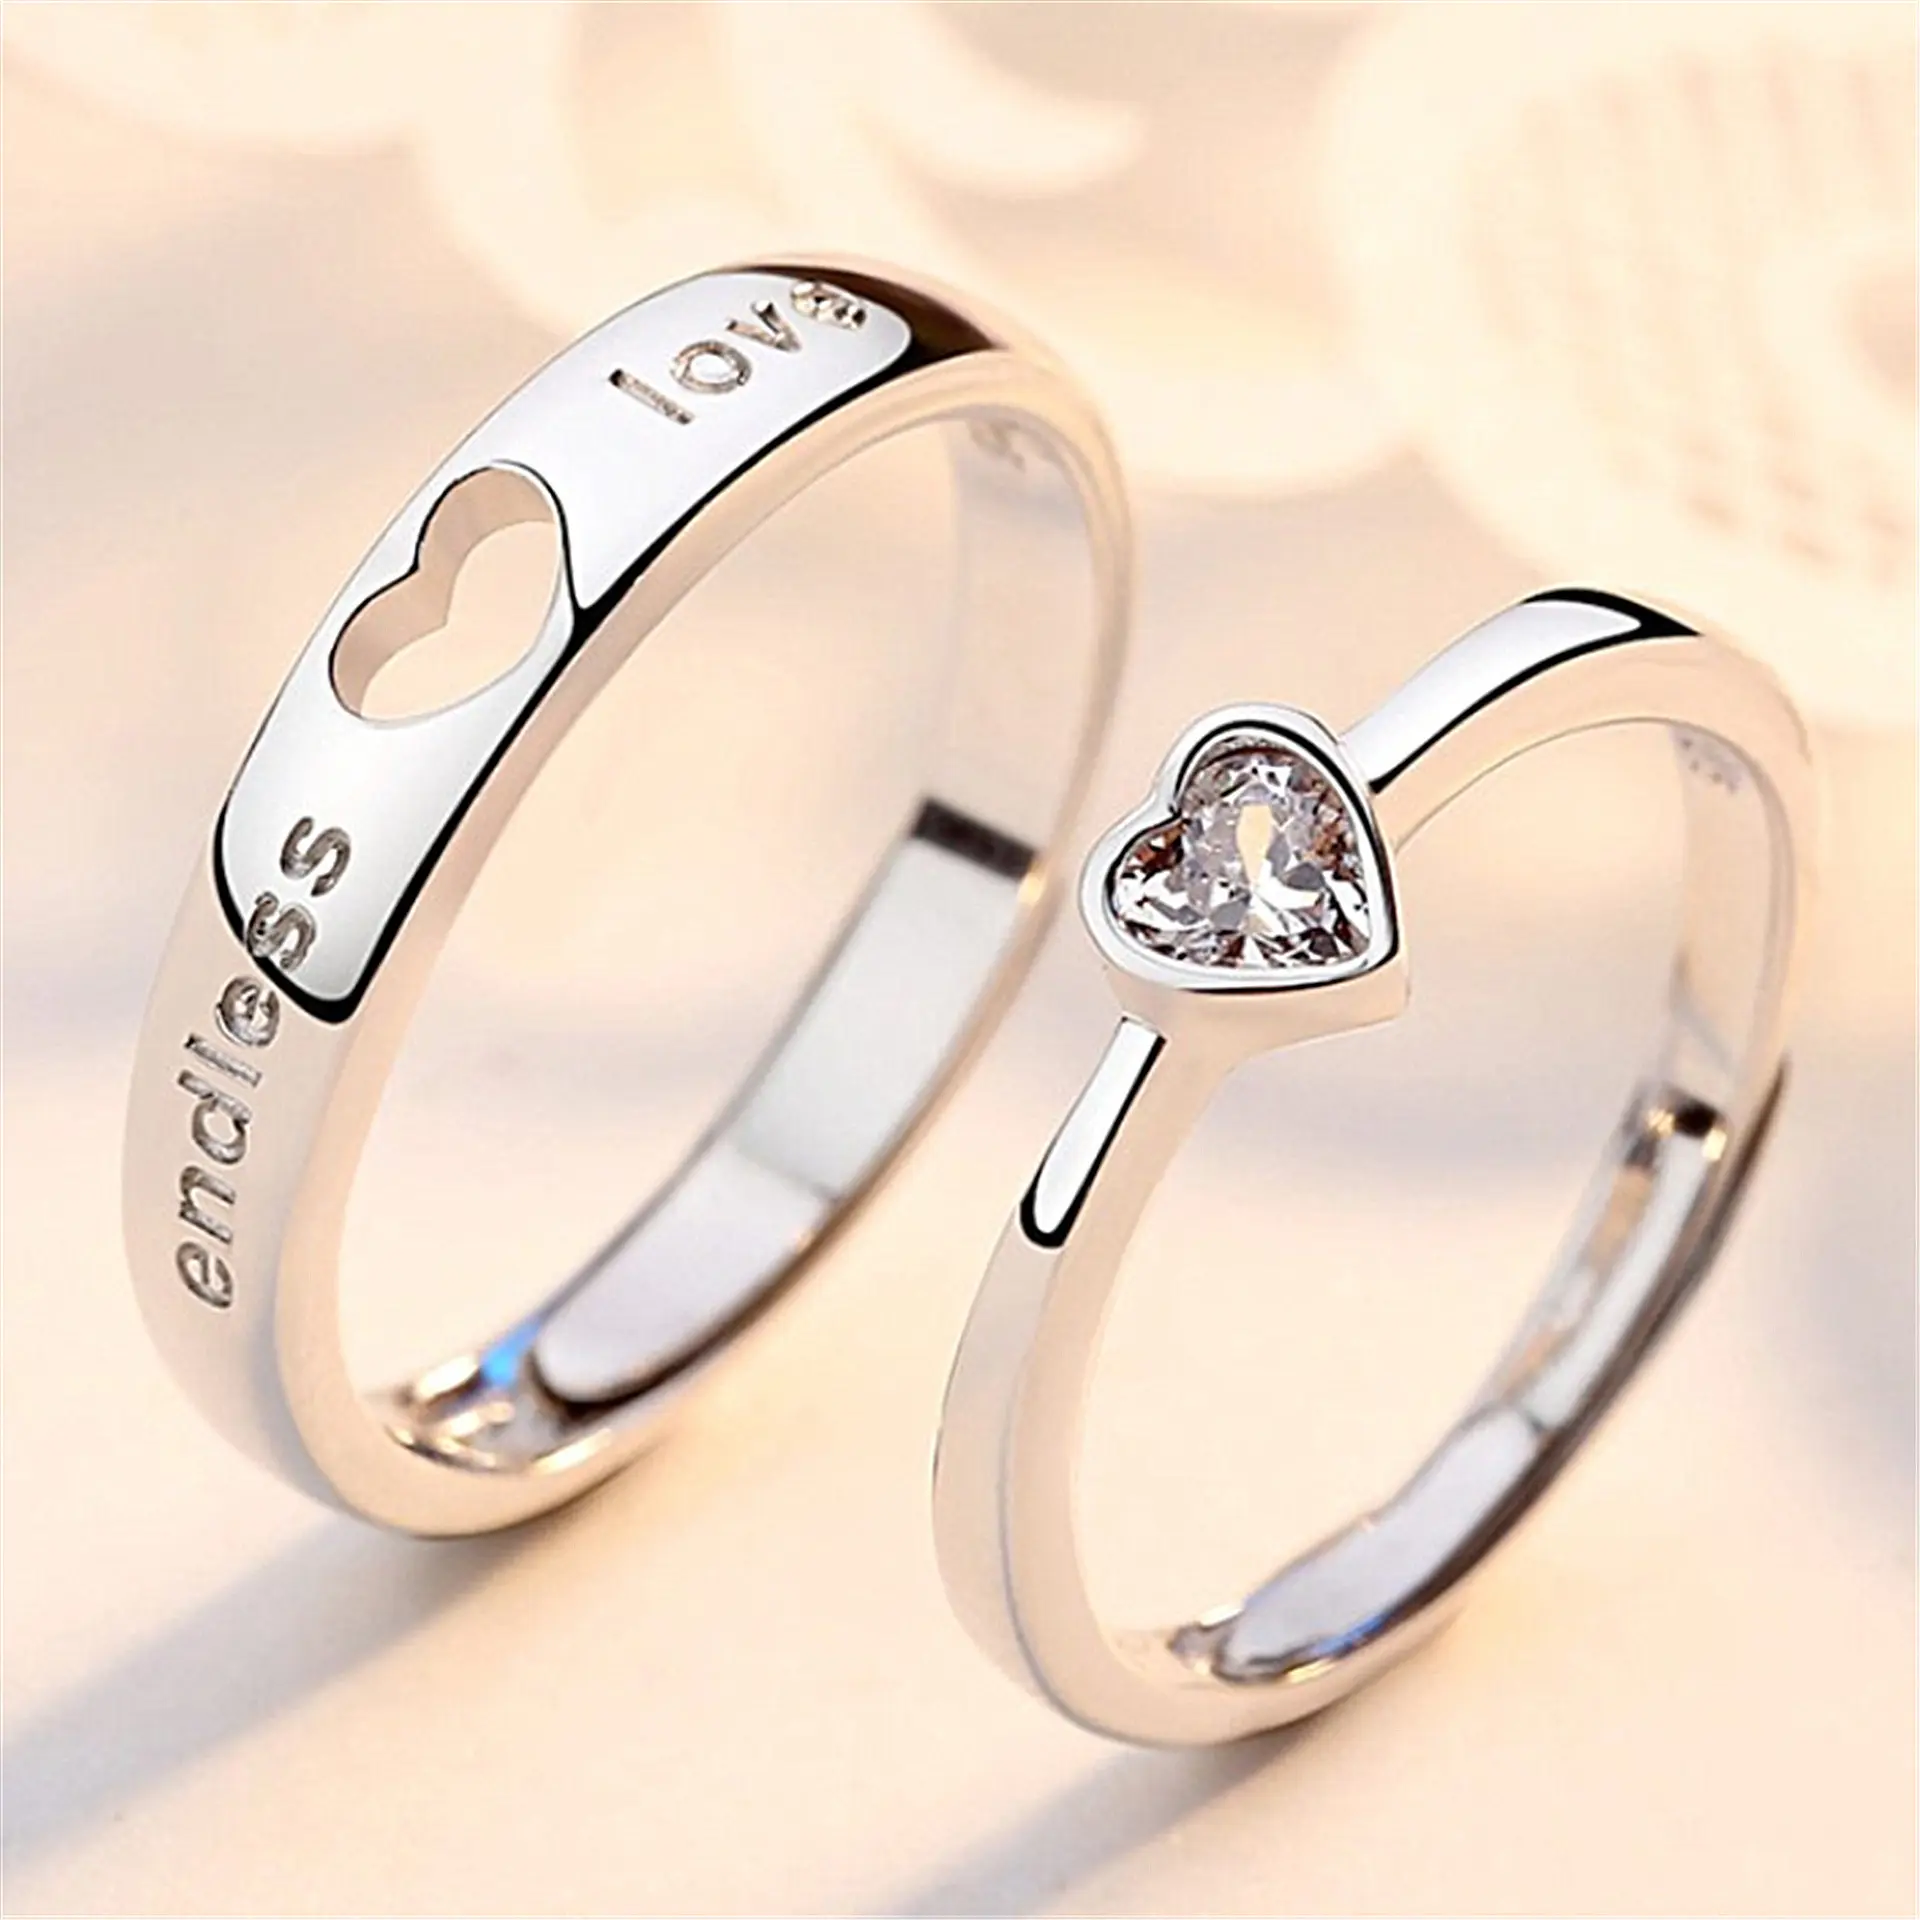 Personality memorial gifts 925 sterling silver fashion heart engagement wedding rings couple set